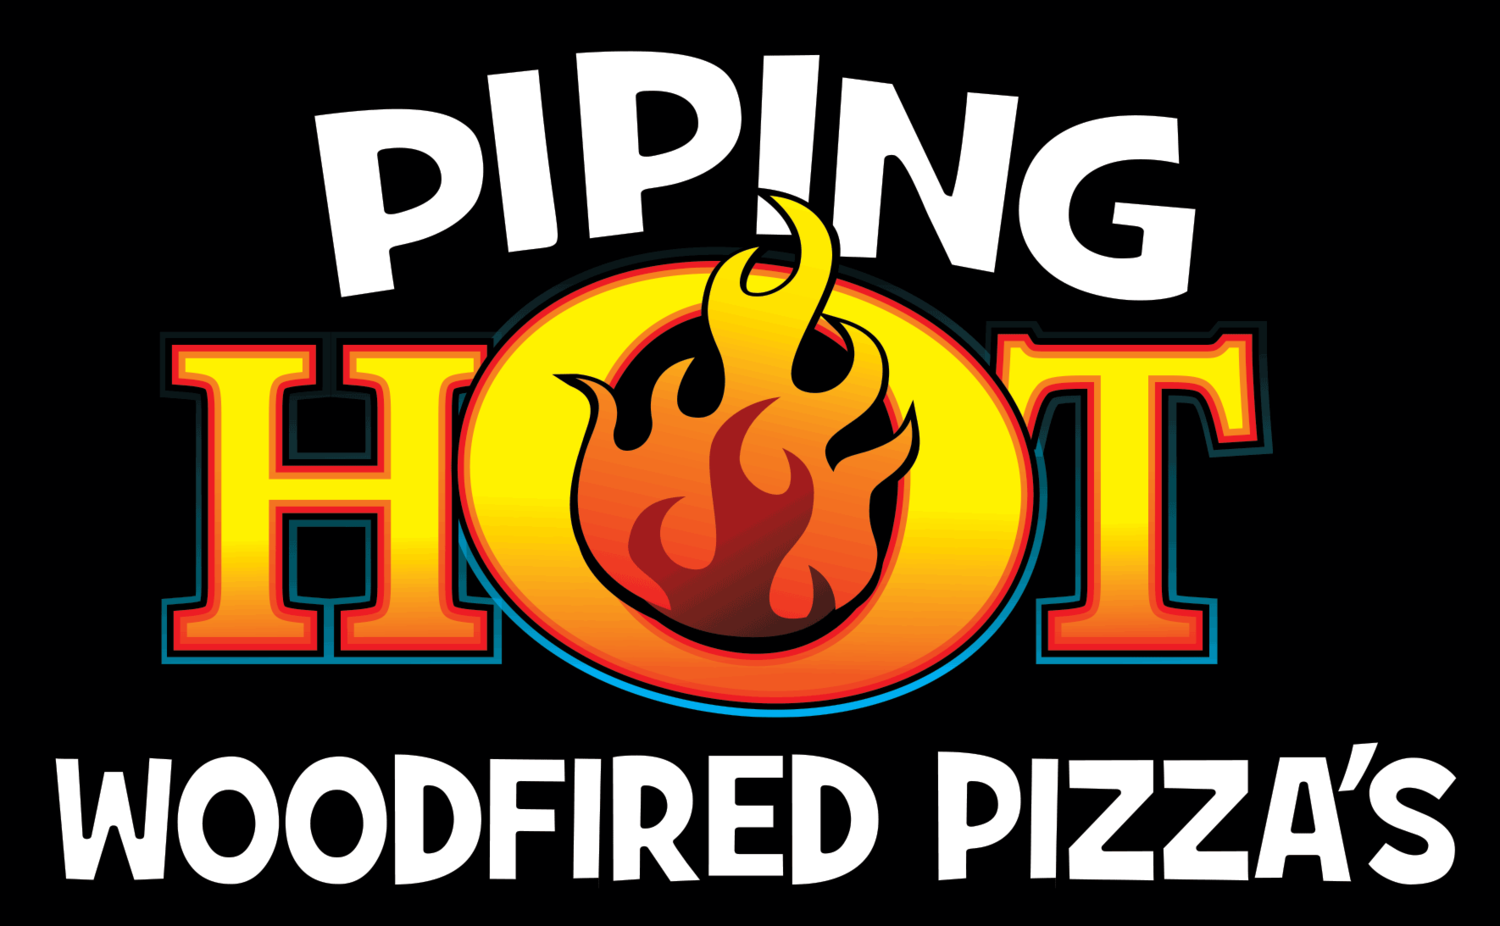 Piping Hot Woodfired Pizzas